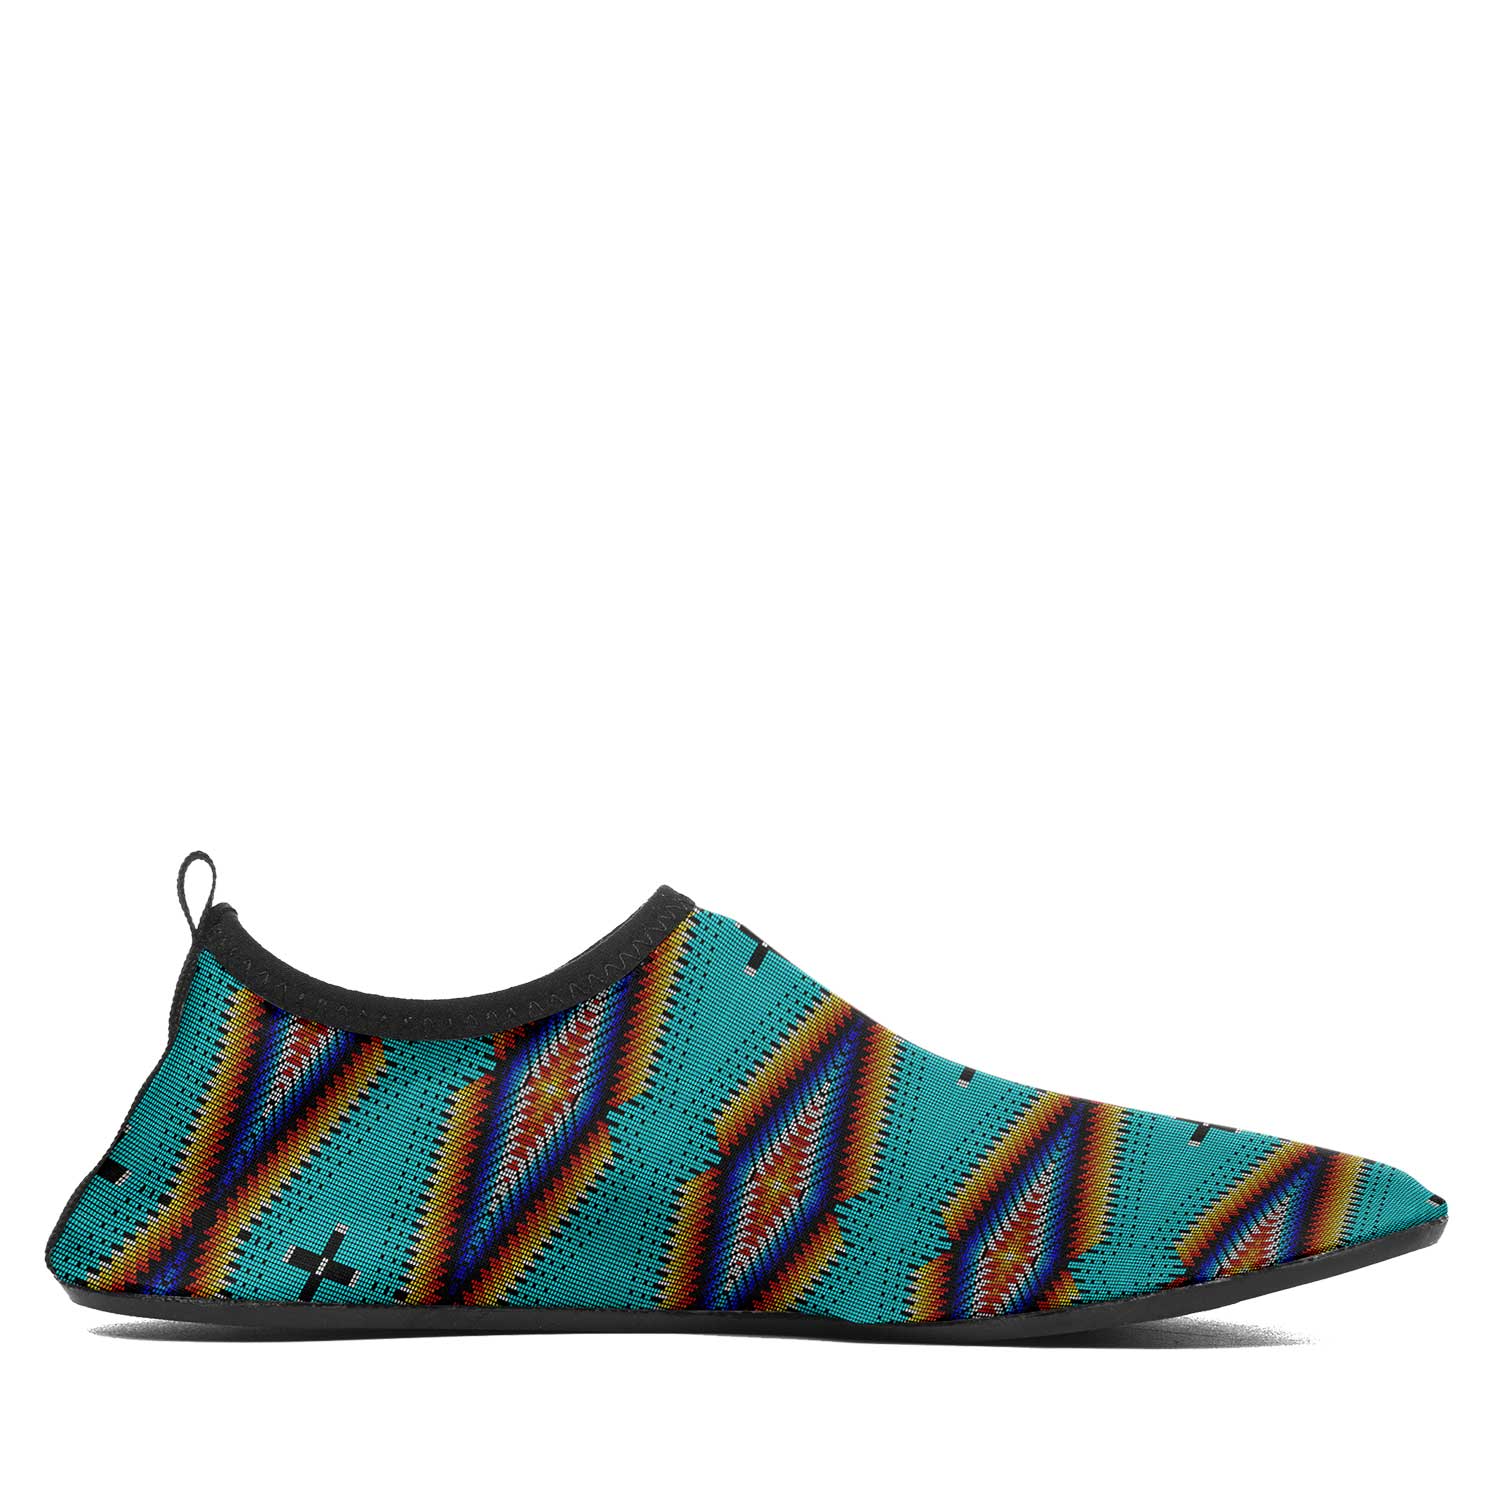 Diamond in the Bluff Turquoise Kid's Sockamoccs Slip On Shoes